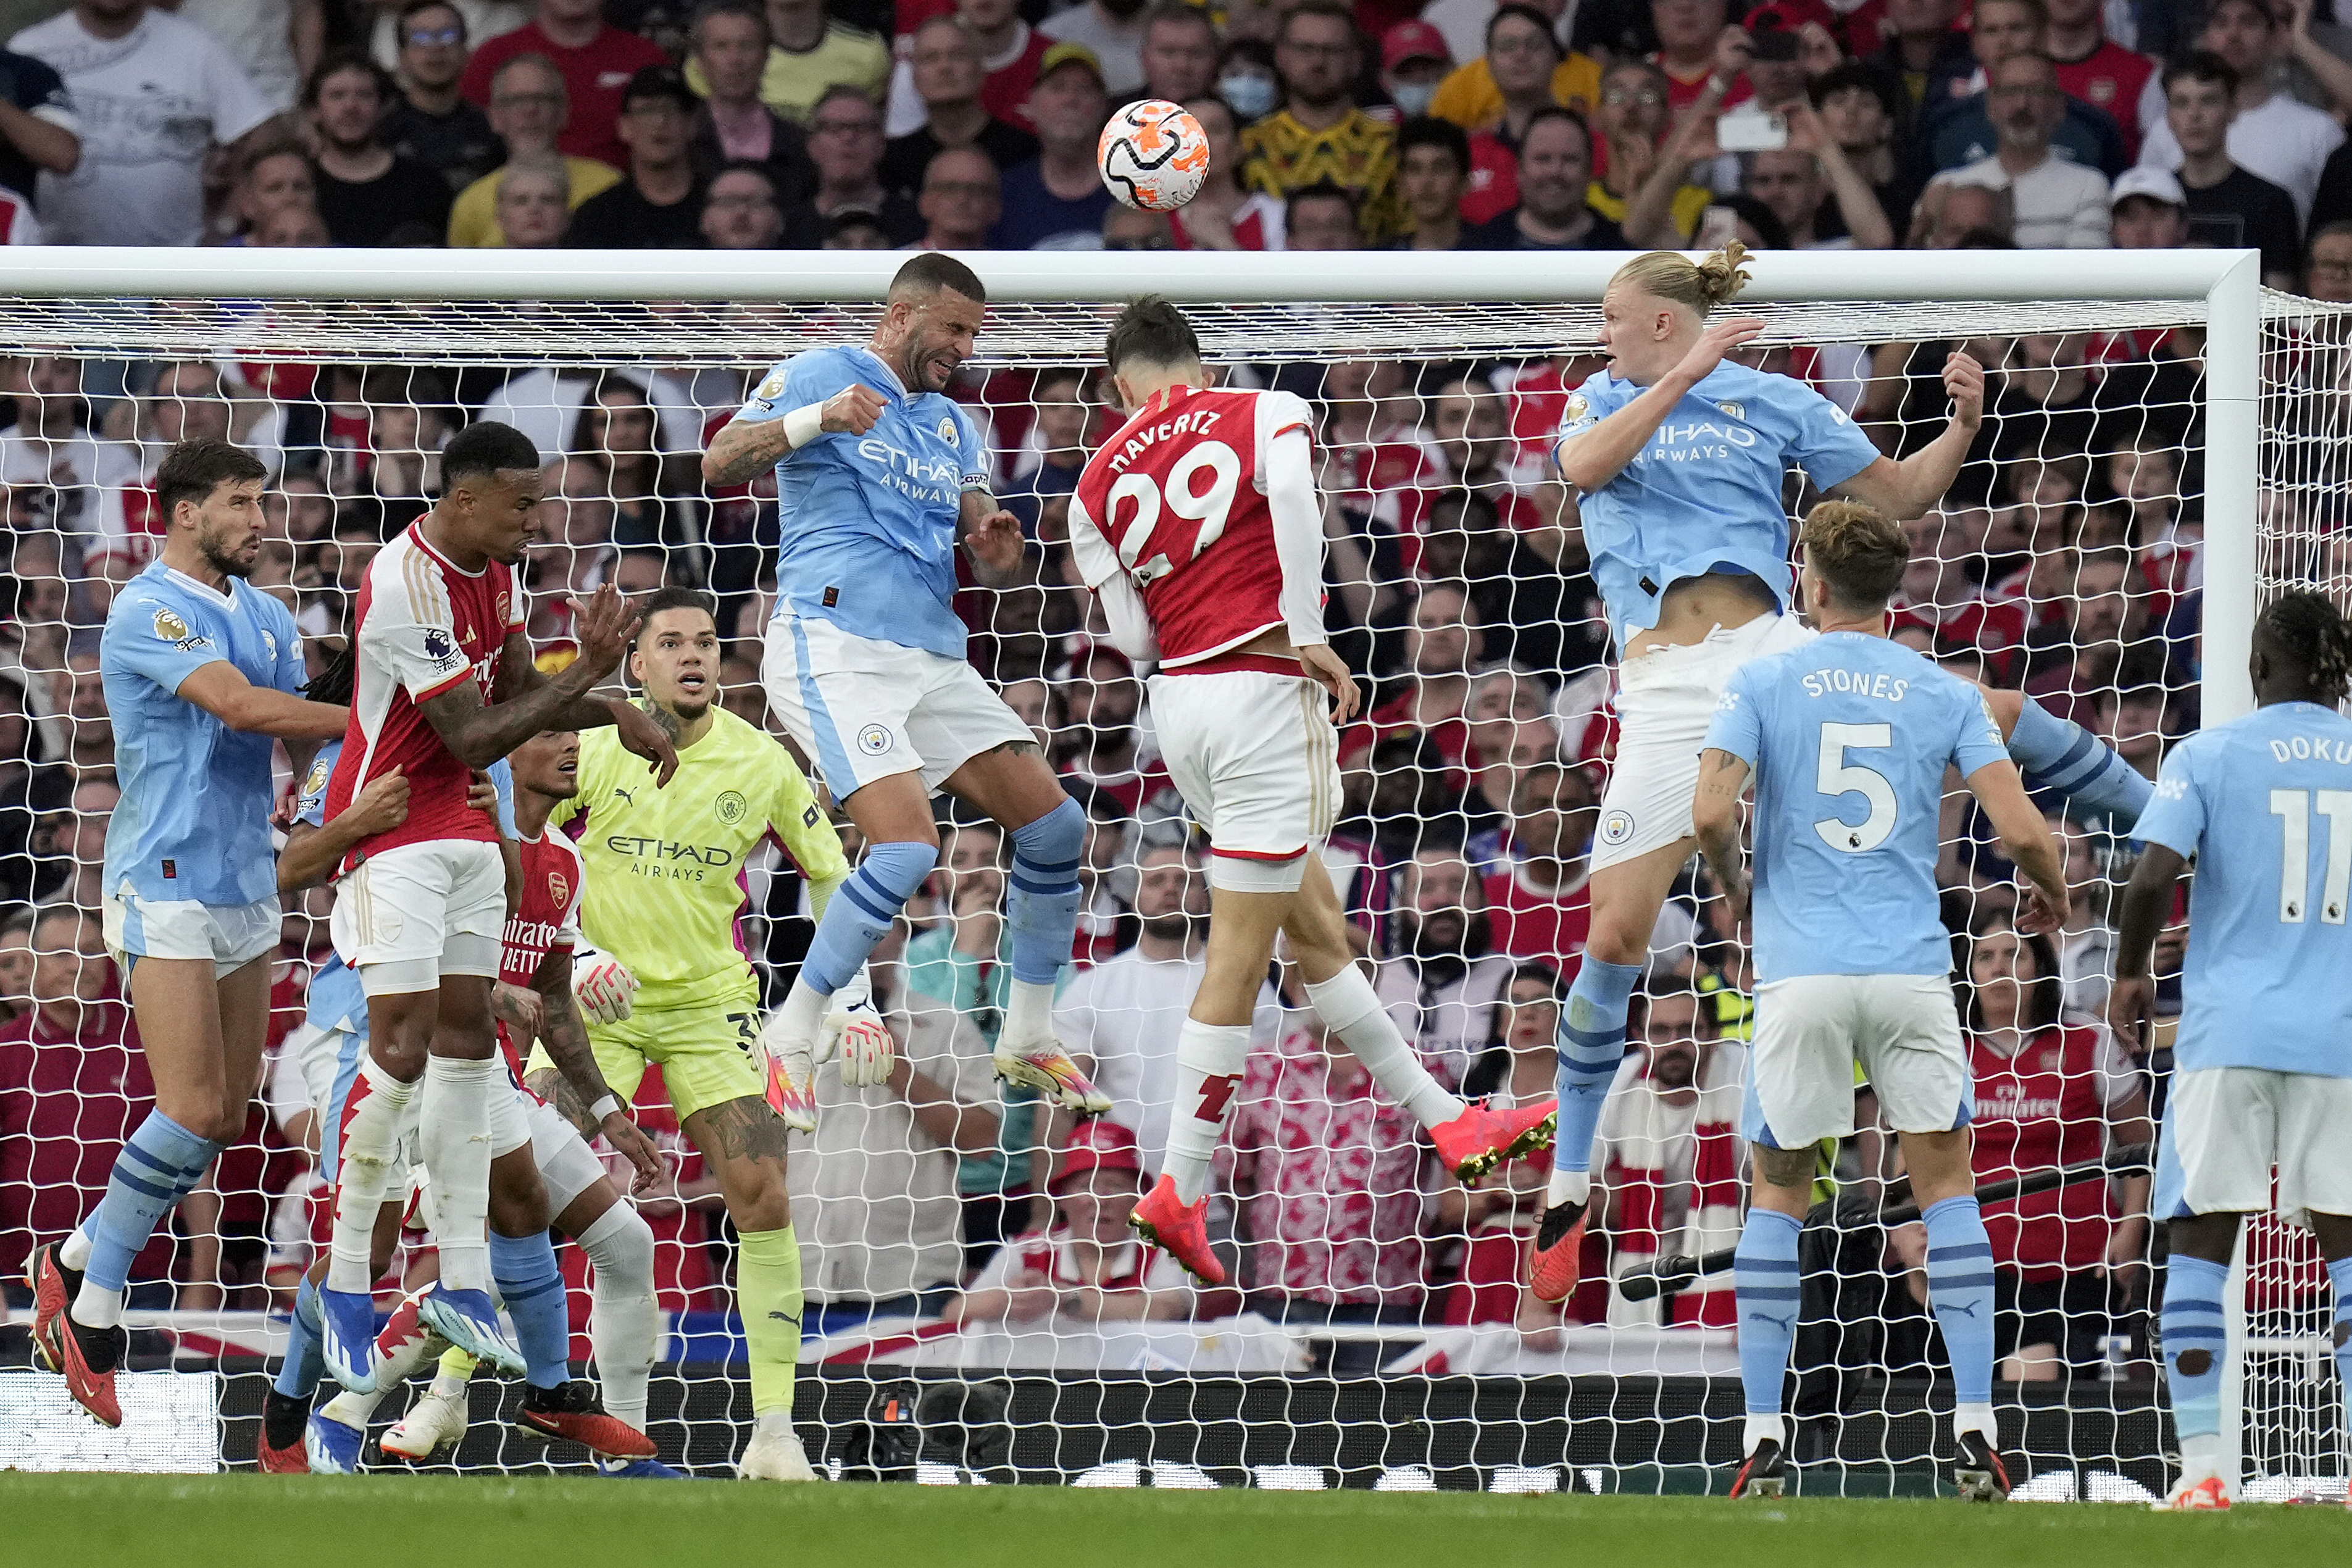 Man City back in business after statement win at Arsenal - News